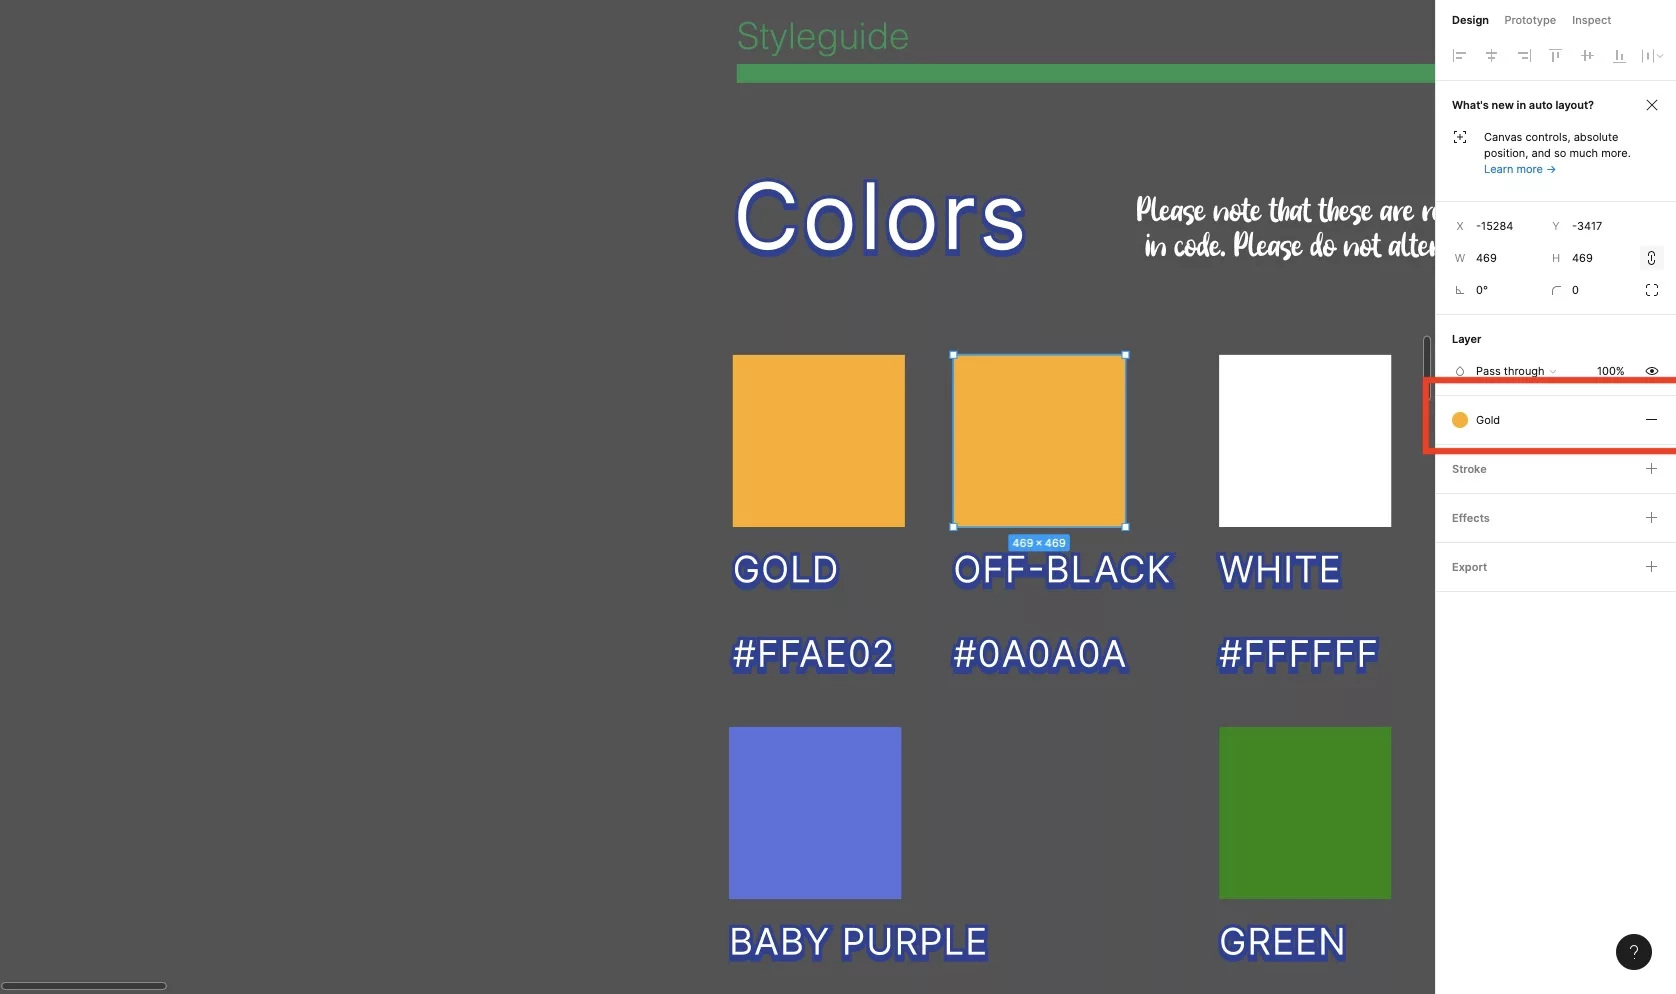 If you select that color it will change the color to the saved color style.